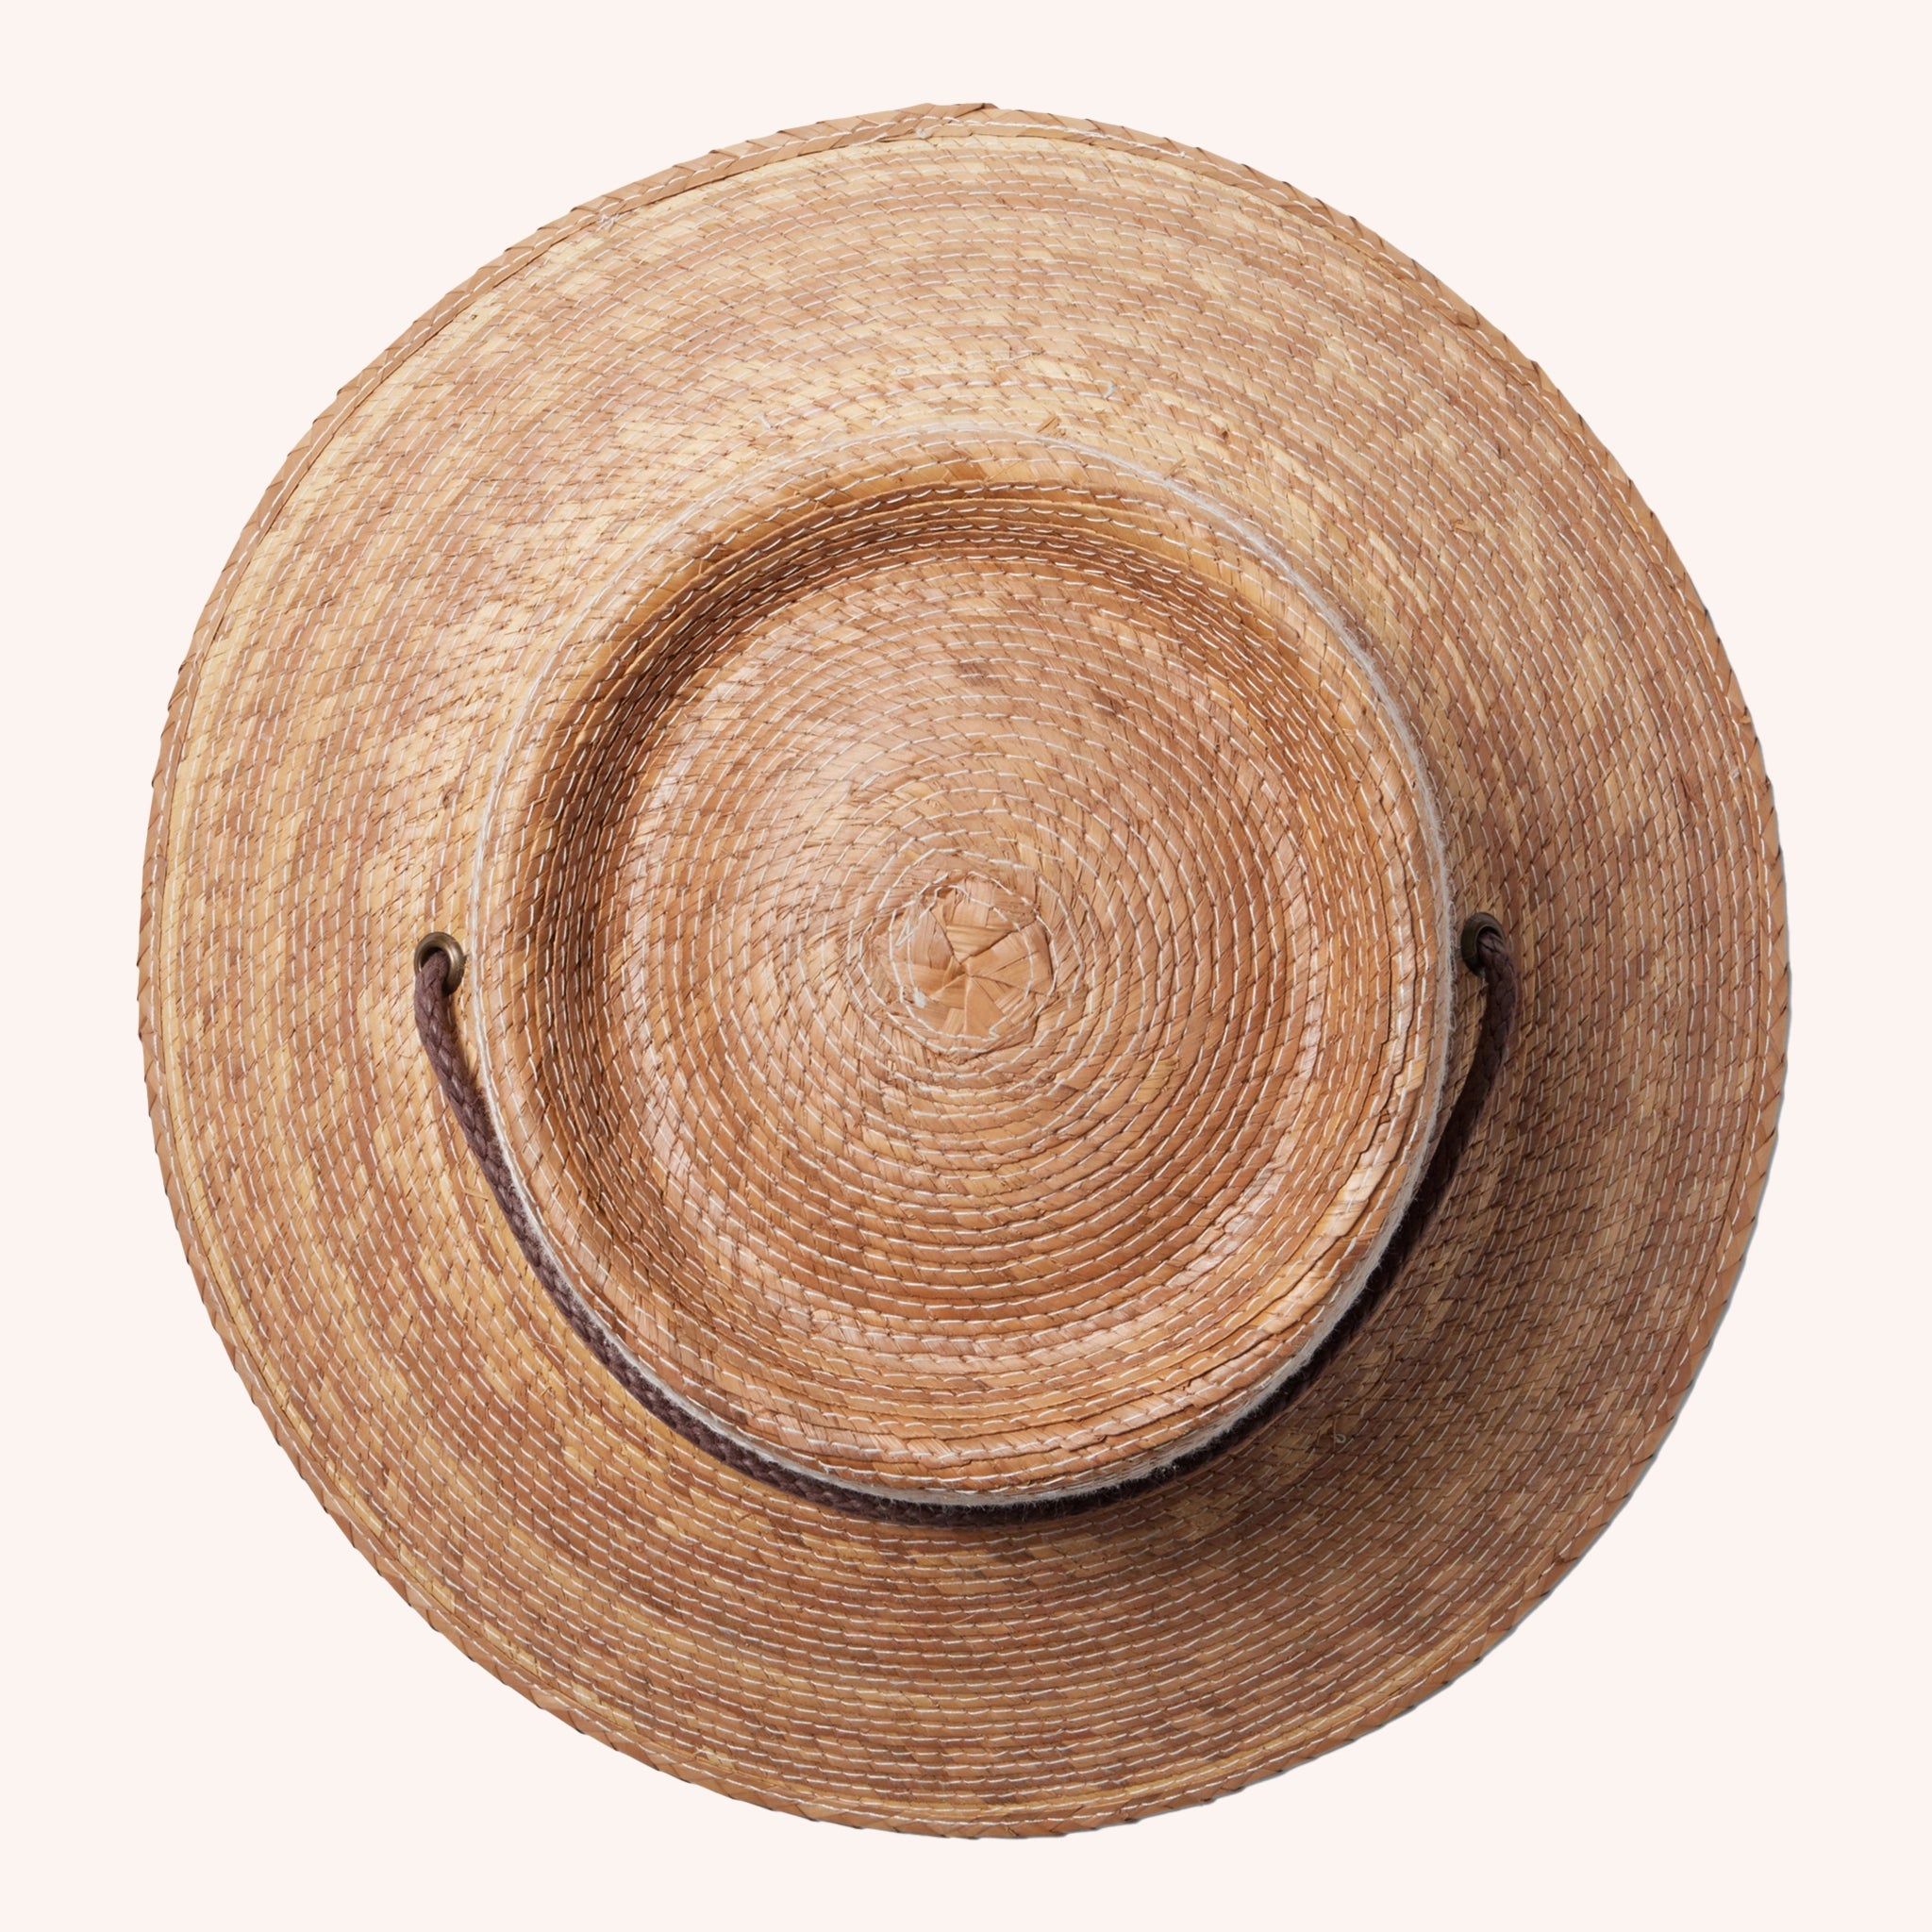 A woven bucket hat with a flat top, a slightly angled brim made of a darker brown straw and also features a brown drawstring.